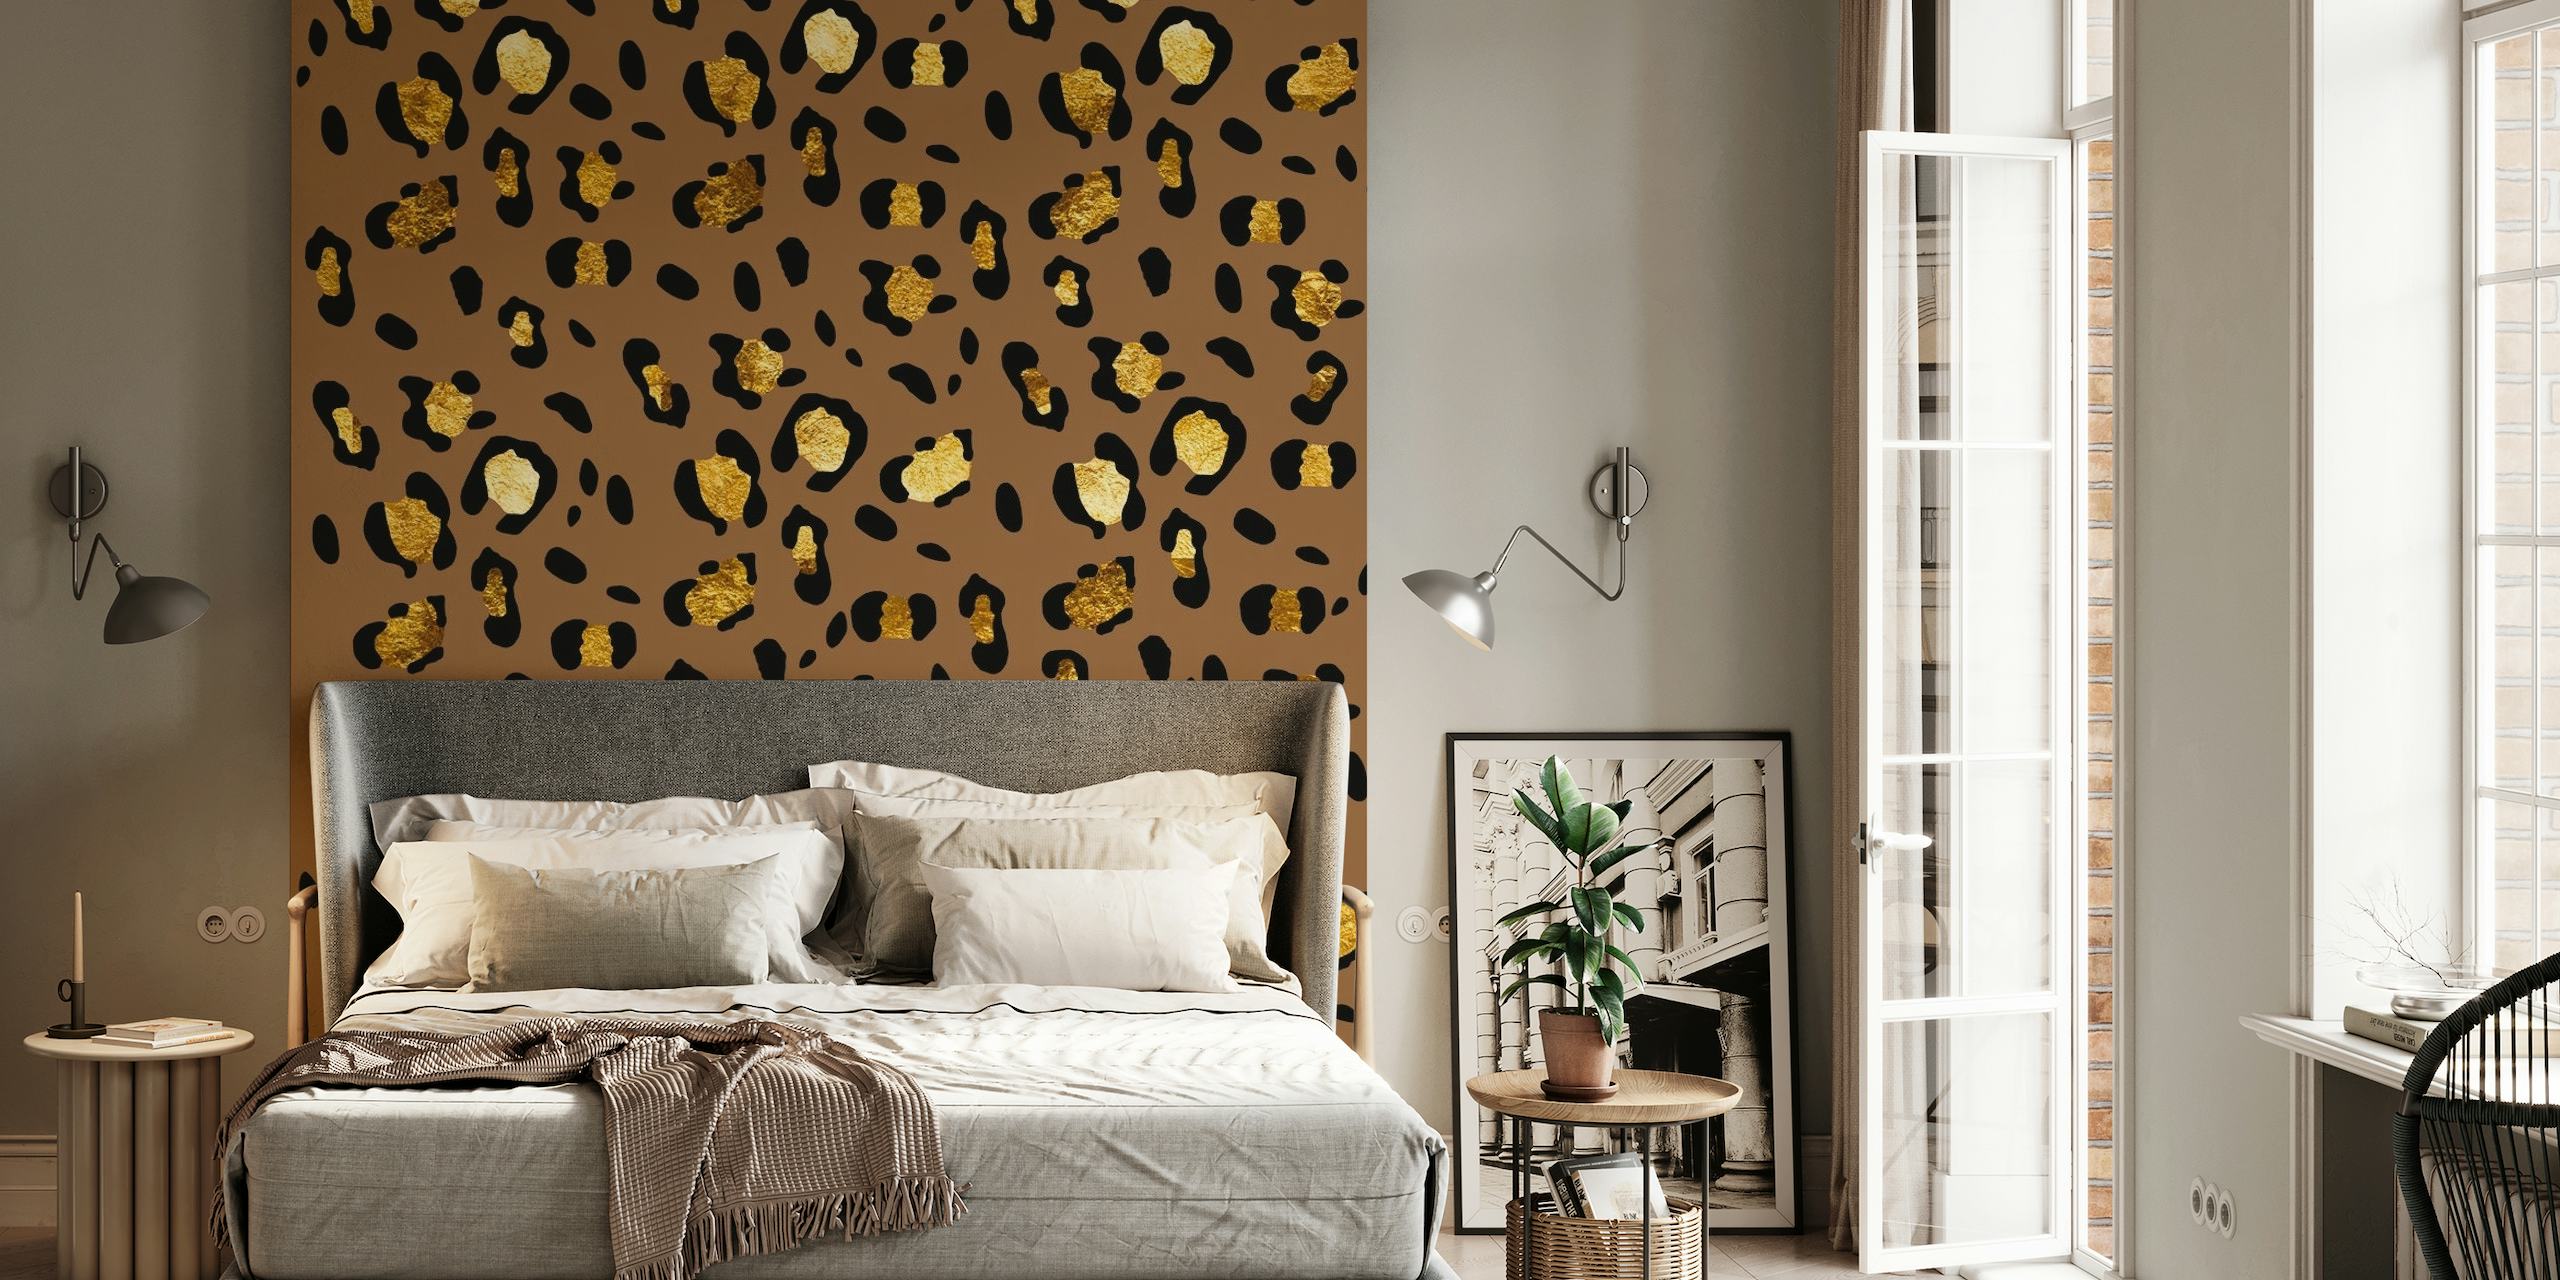 Leopard Animal Print Glam 29 wall mural with golden spots on a coffee-colored background